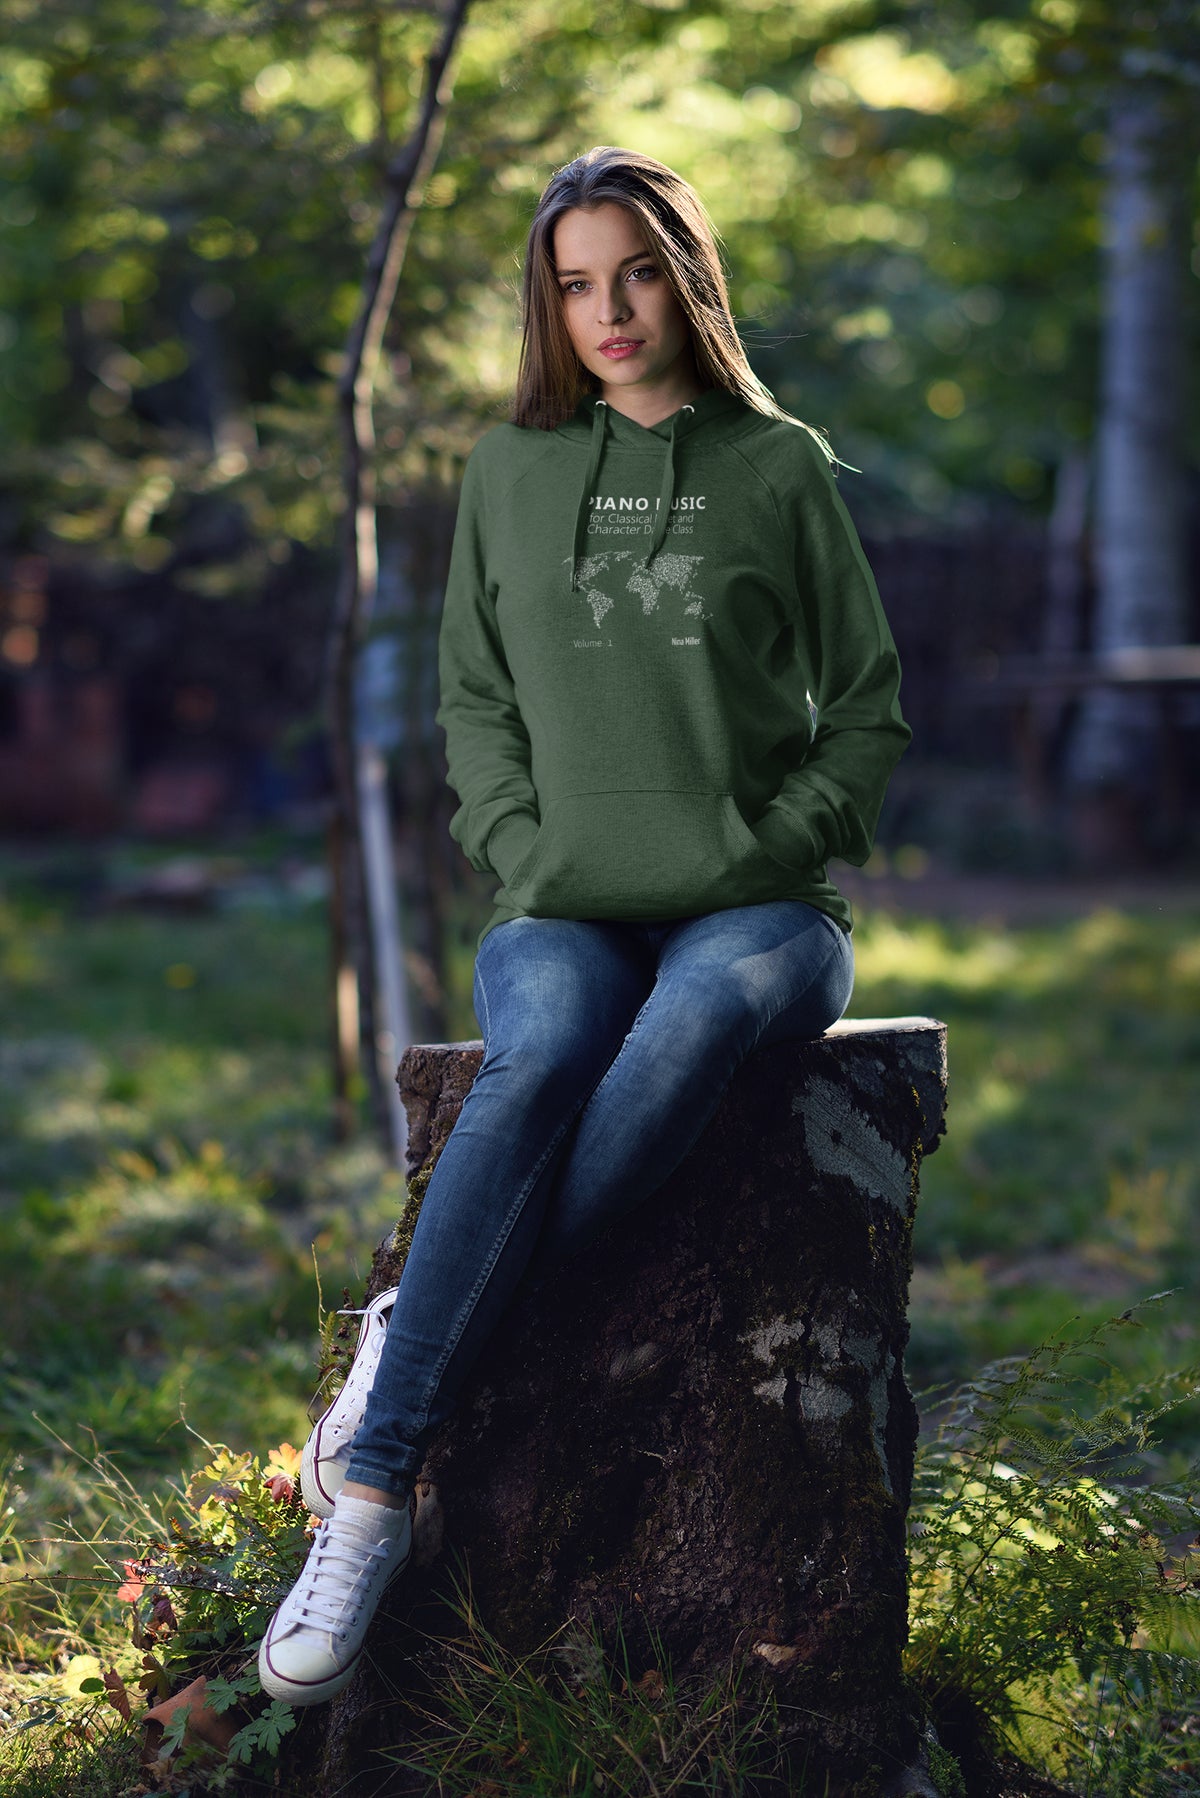 Piano Music for Character Dance Class - Unisex Heavy Blend™ Hooded Sweatshirt